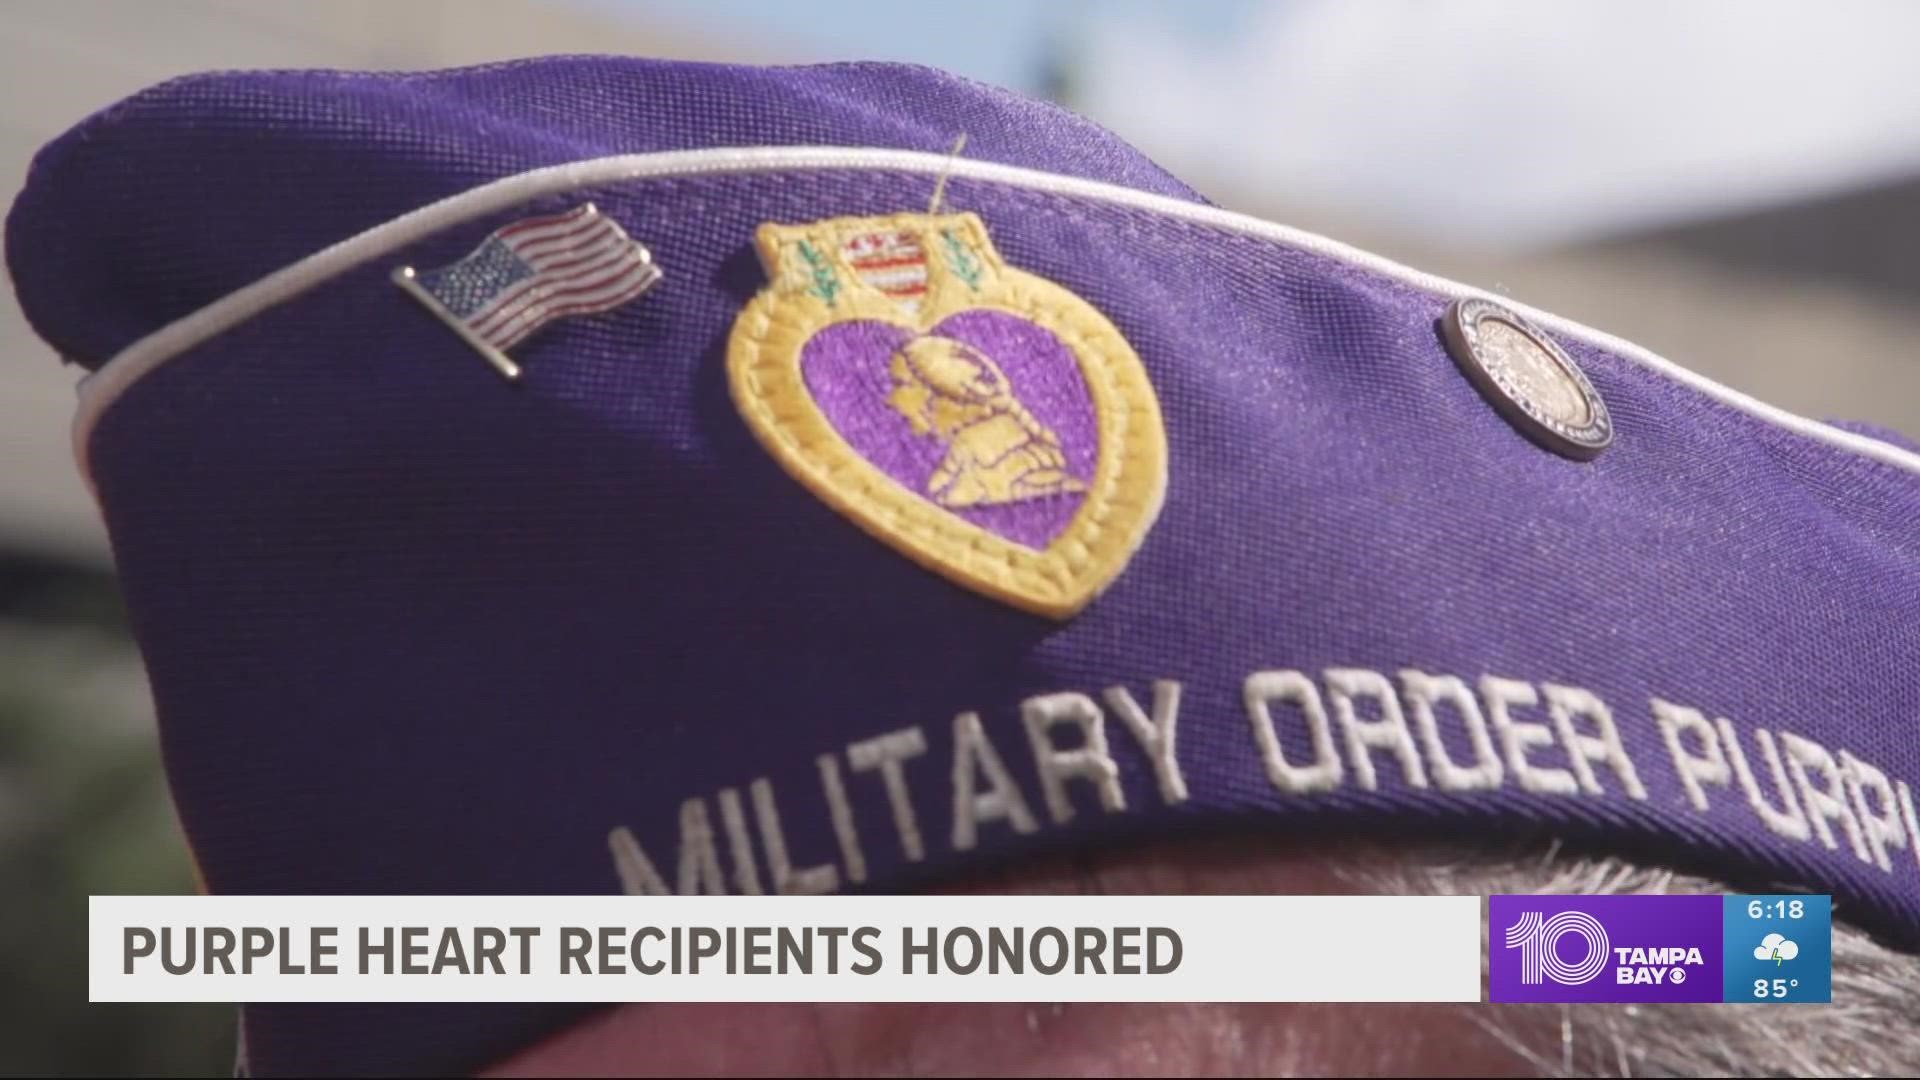 The Purple Heart award is the oldest military honor that is still presented to American service members.